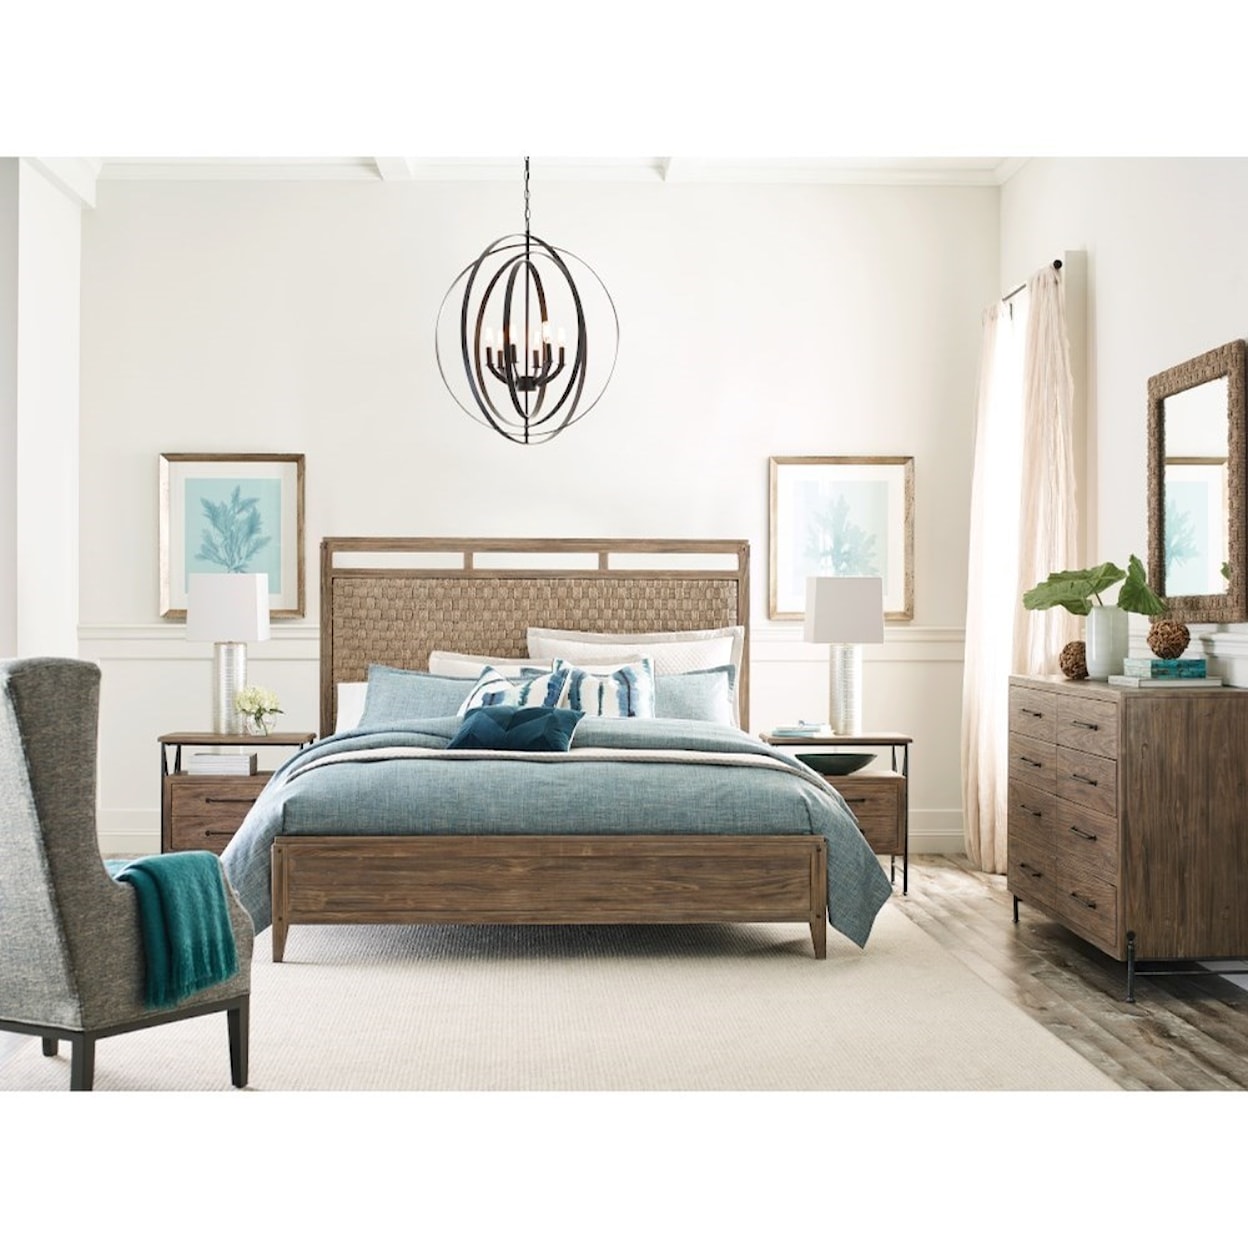 Kincaid Furniture Modern Forge Queen Bedroom Group